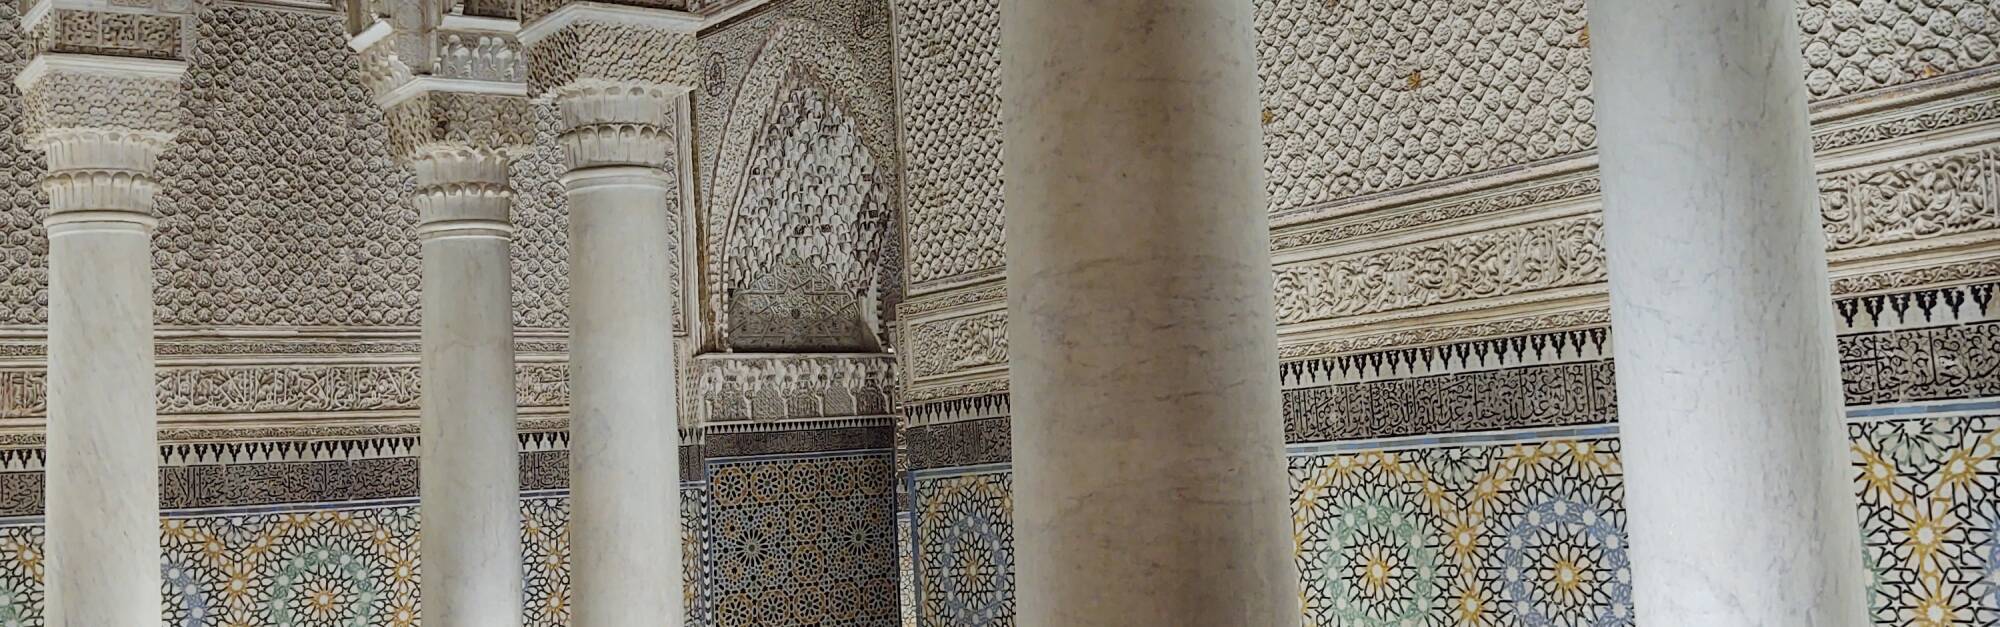 Interior of the Saadian tombs: marble pillars, multi-color zellij tilework, carved stucco. Quranic and devotional text as black on grey tiles, and above that, carved into the stucco. Doorway with lambrequin arch, intricate pattern of lobes and points.